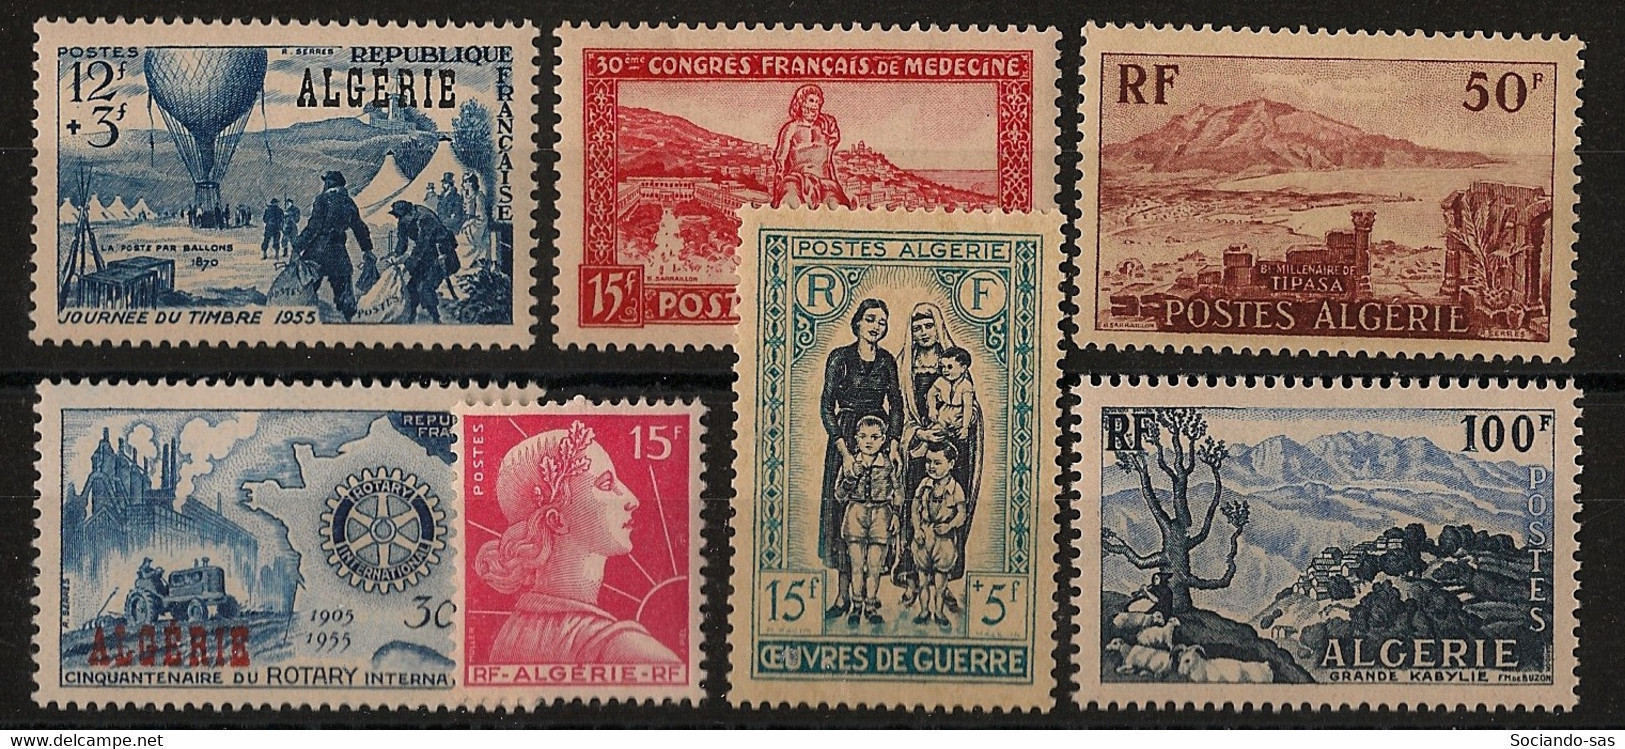 ALGERIE - Année Complète 1955 - N°YT. 325 à 331 - Complet 7 Valeurs - Neuf Luxe ** / MNH / Postfrisch - Full Years